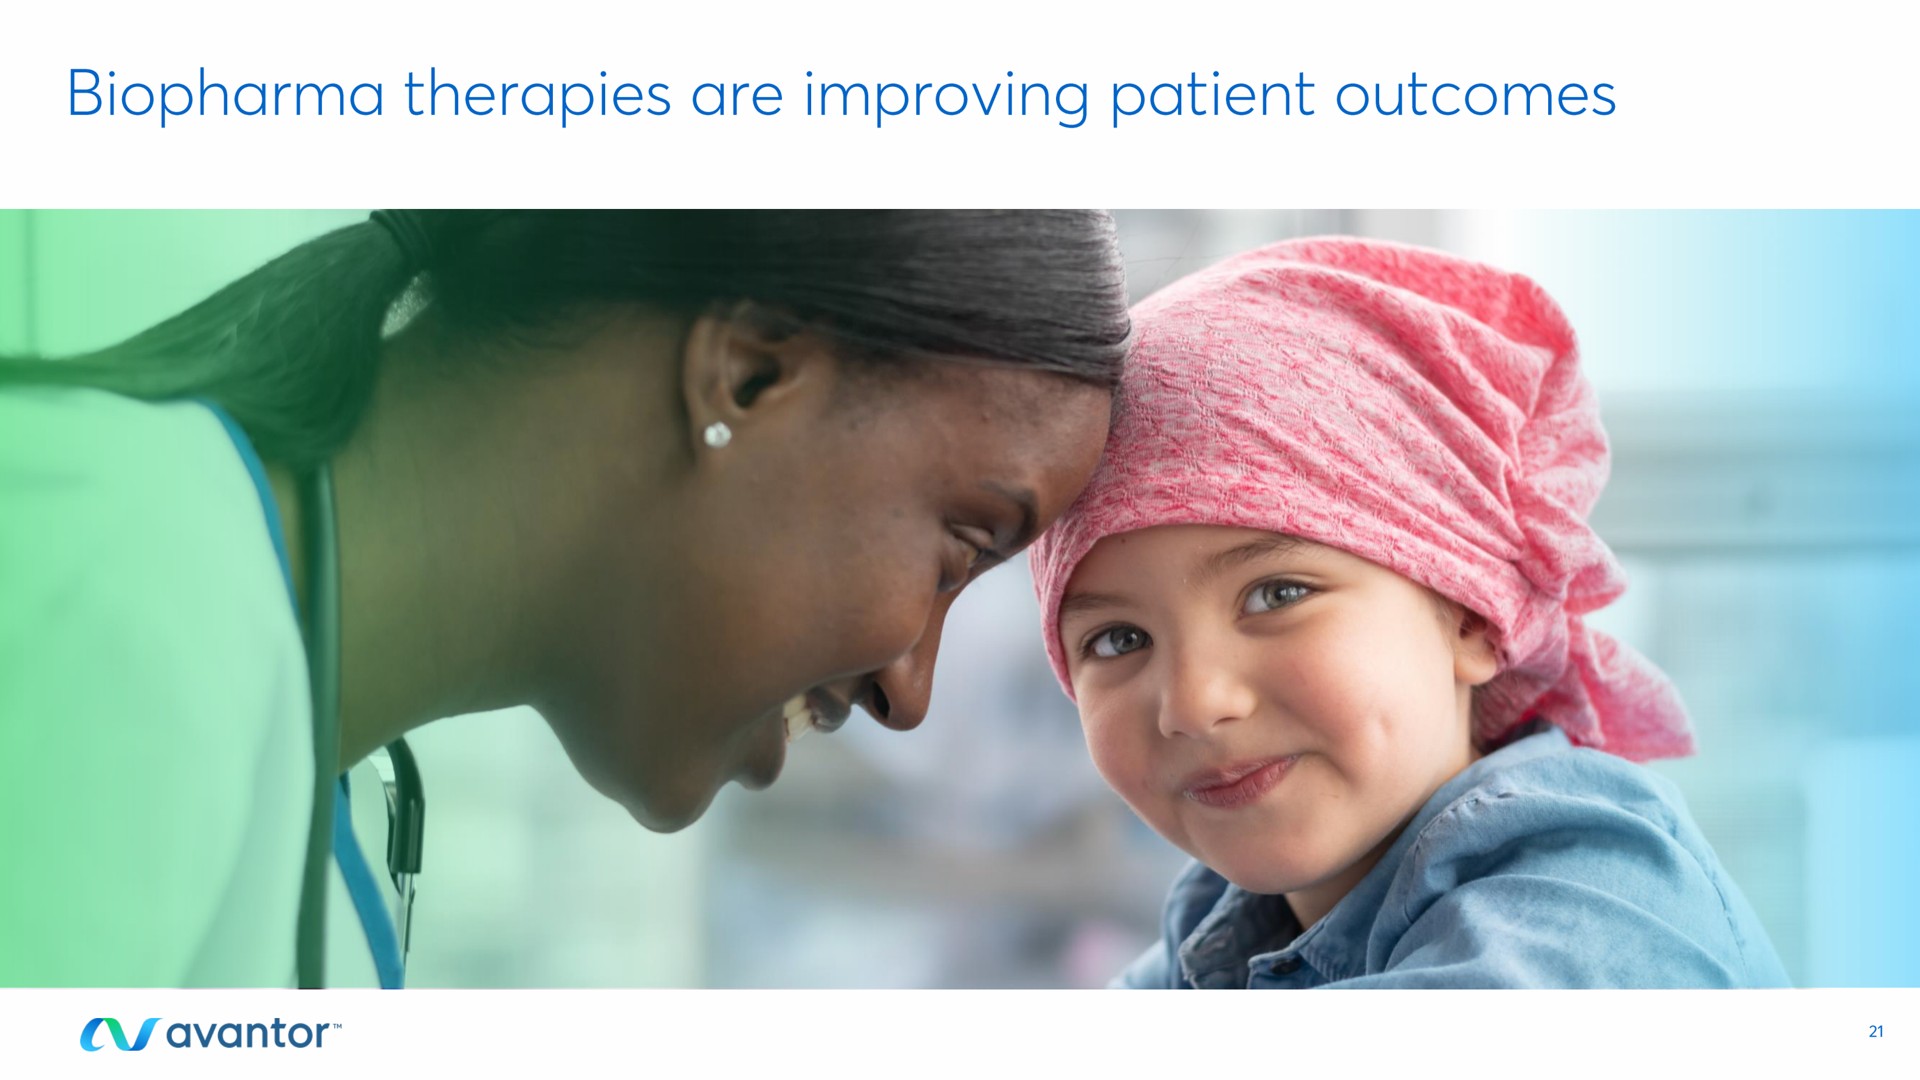 therapies are improving patient outcomes | Avantor